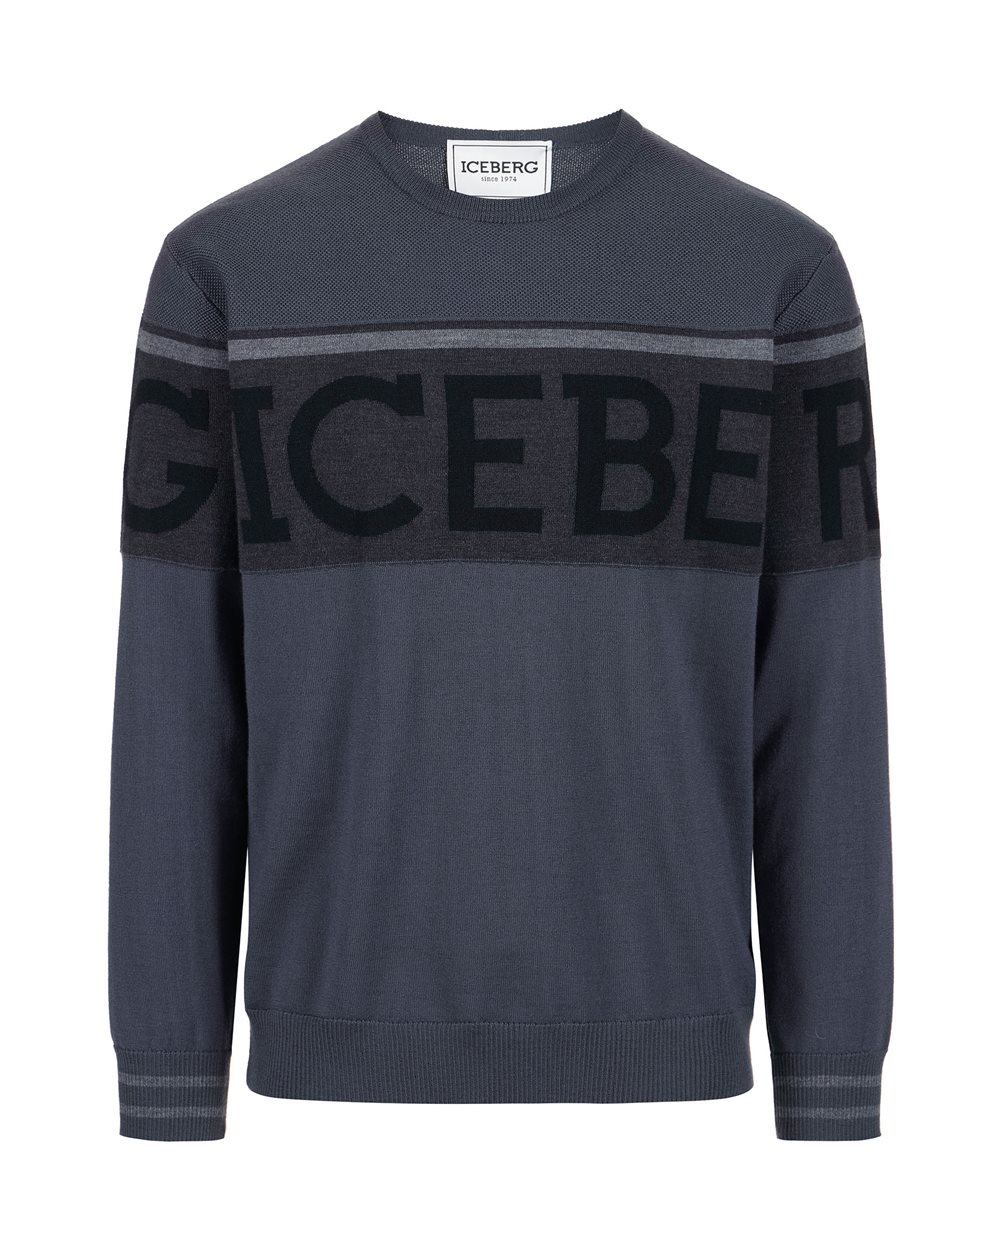 Wool sweater with logo - carryover  | Iceberg - Official Website